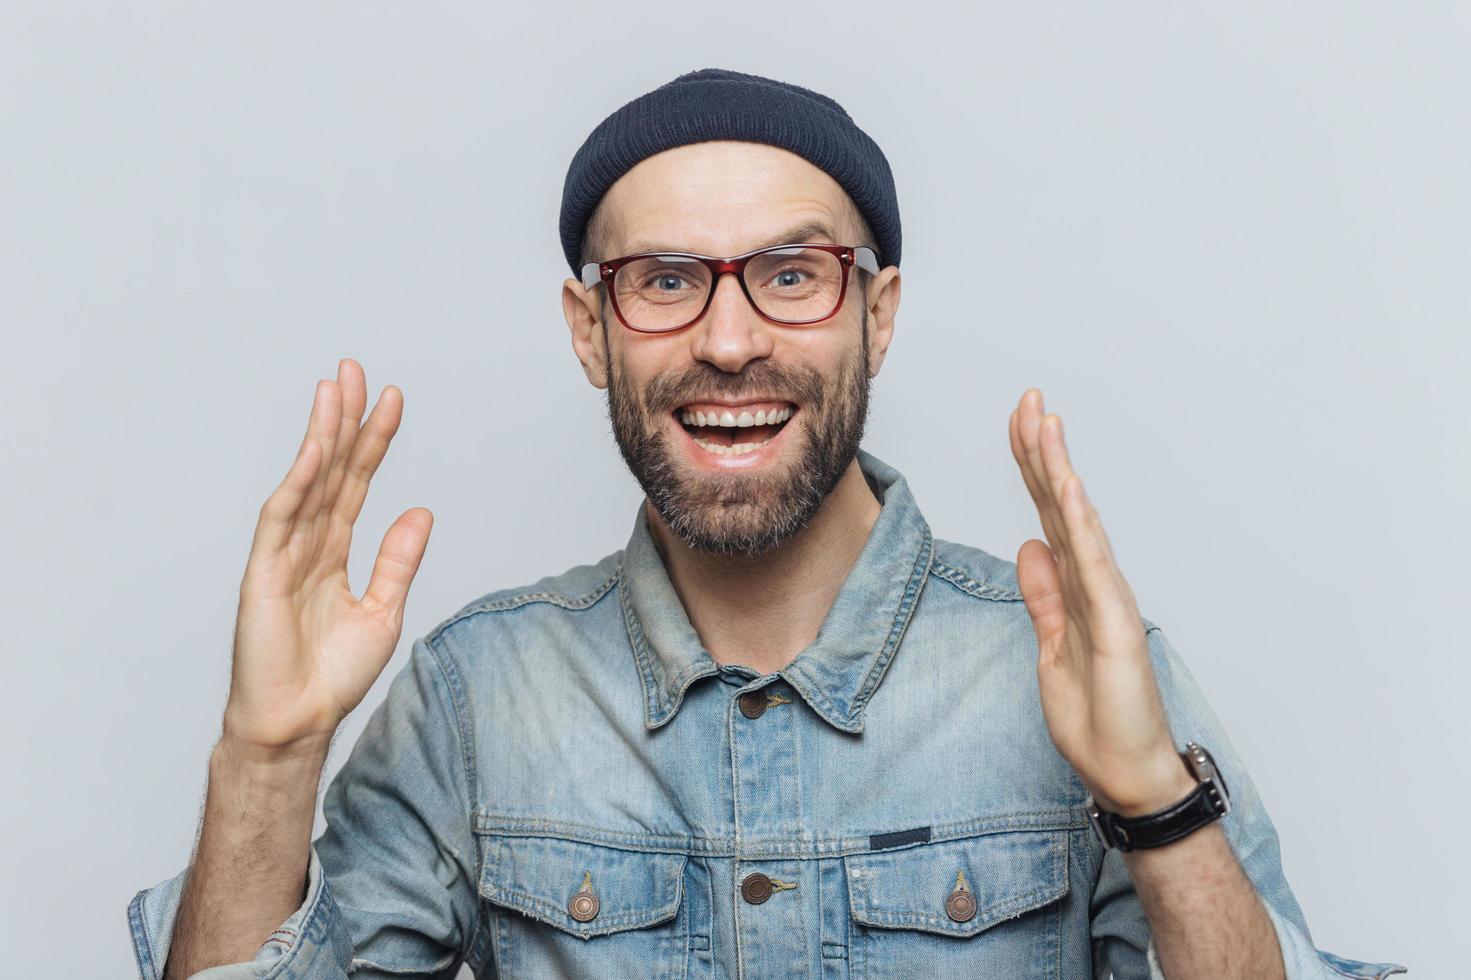 Handsome happy man raises hands with excitment, has overjoyed expression, looks with delighted face, has thick beard and mustache. Glad man in eyewear poses against white background, has fun photo